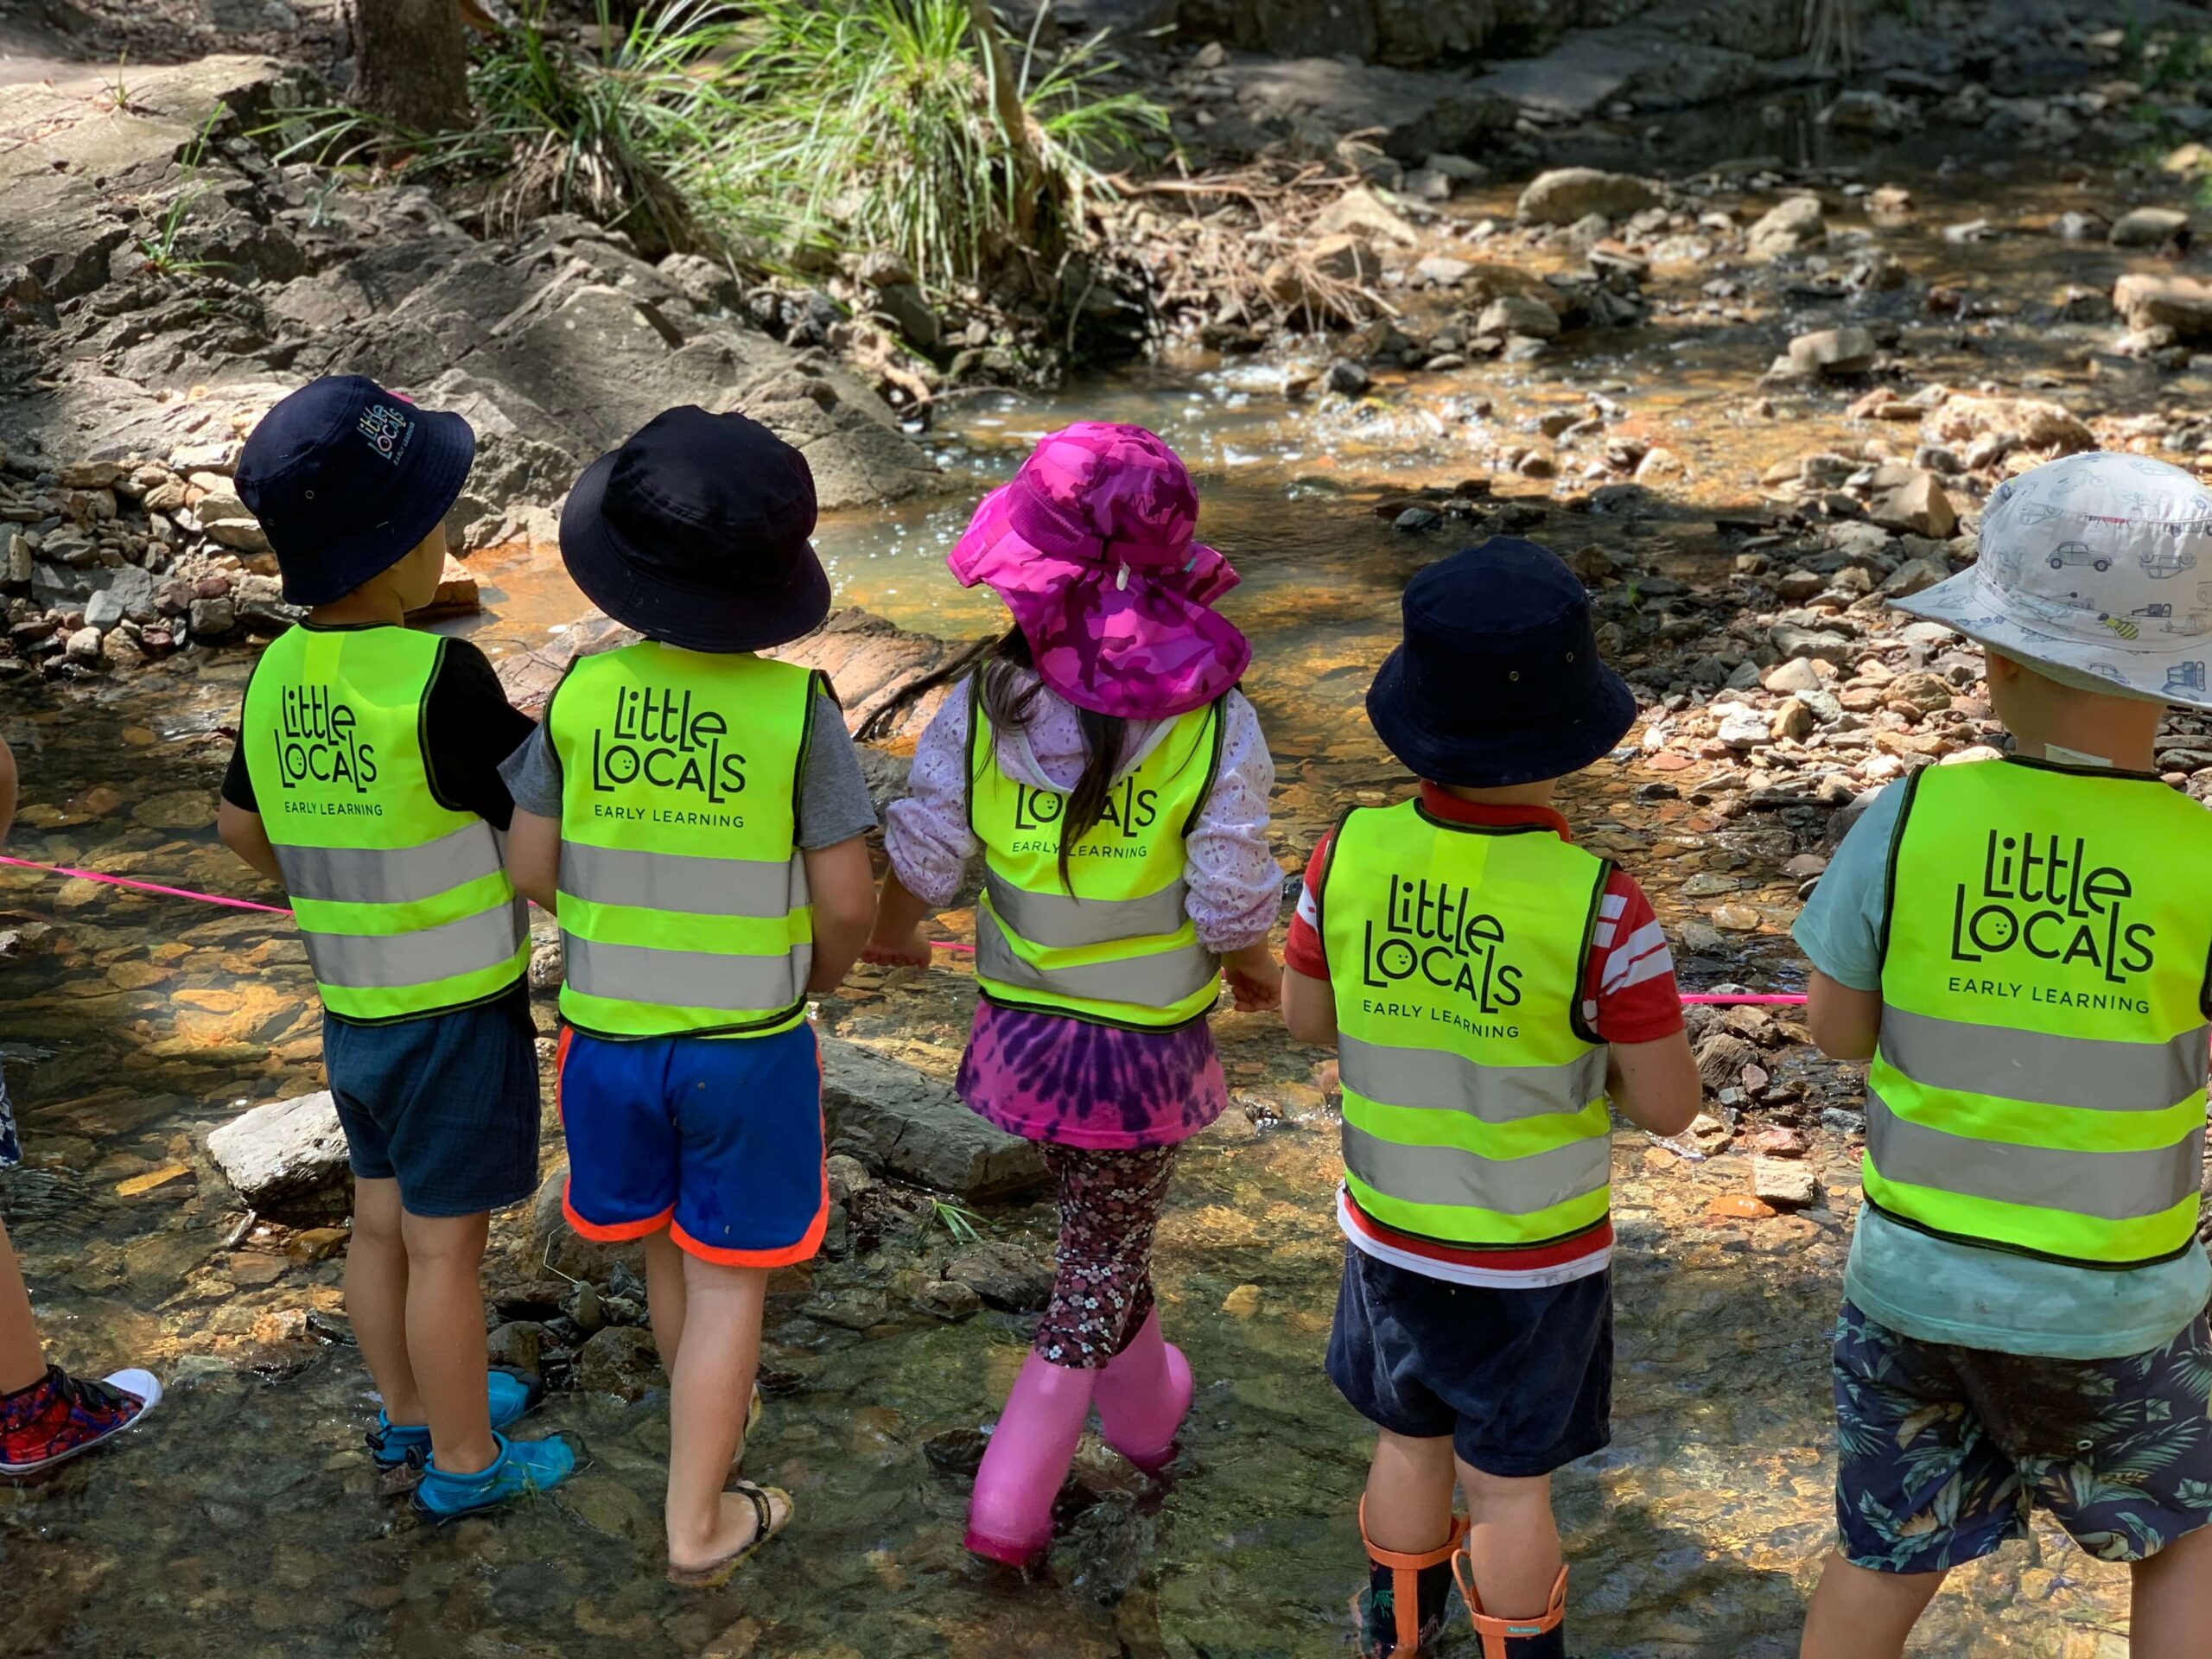 A group of children wearing Little Locals’ Early Learning high-vis vests stand holding a piece of string together just before a creek during a Bush Kindy excursion at the long daycare centre.